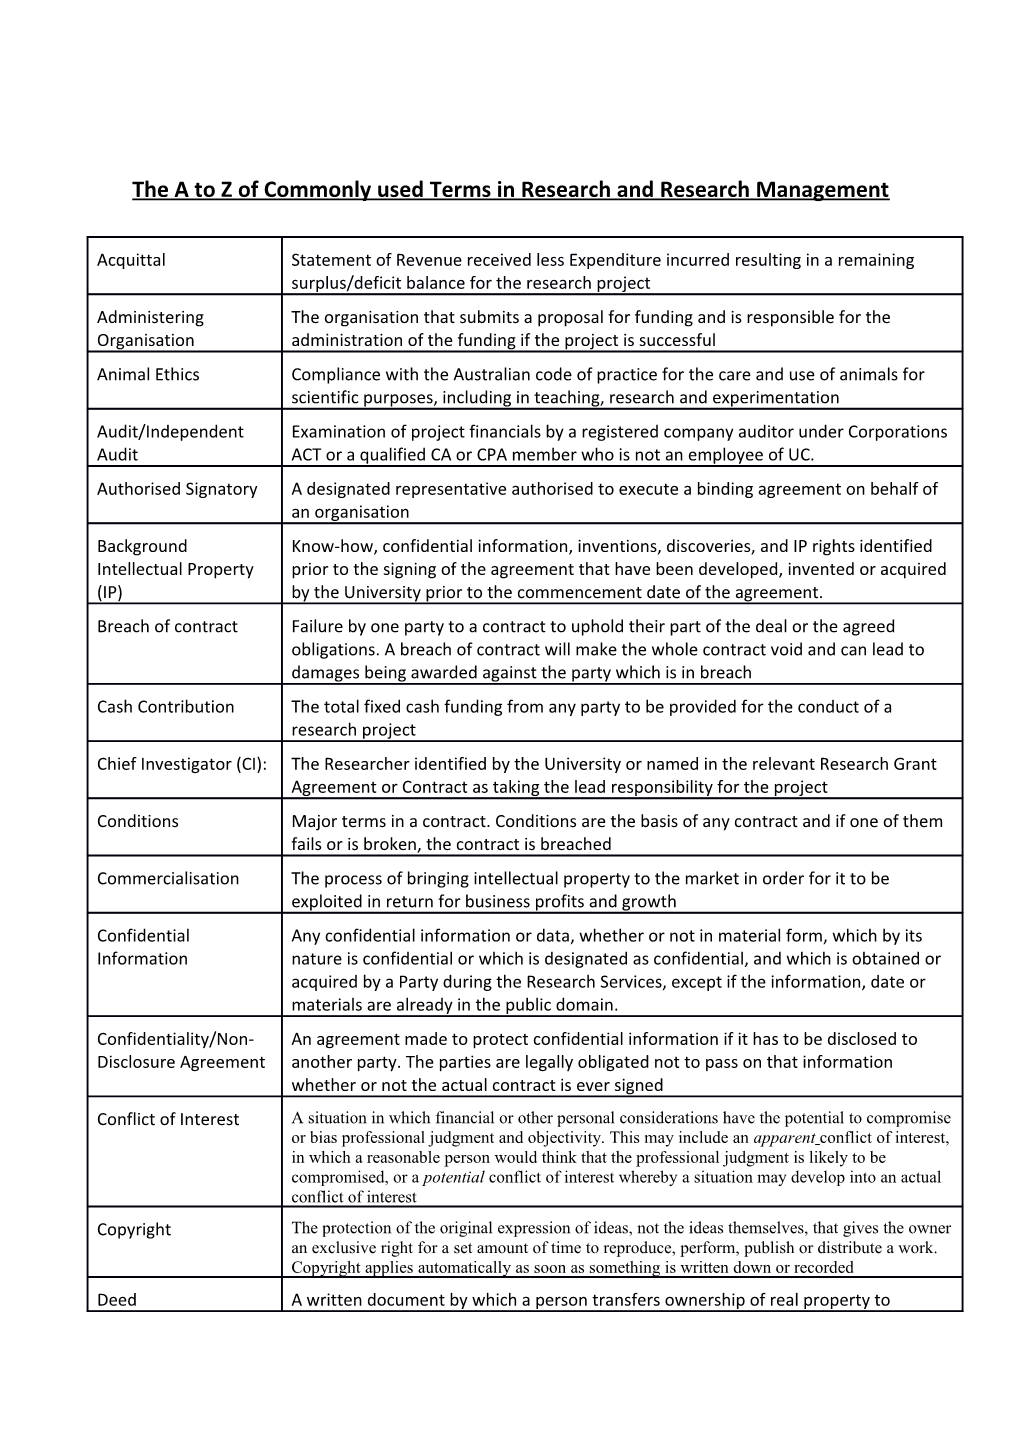 The a to Z of Commonly Used Terms in Research and Research Management